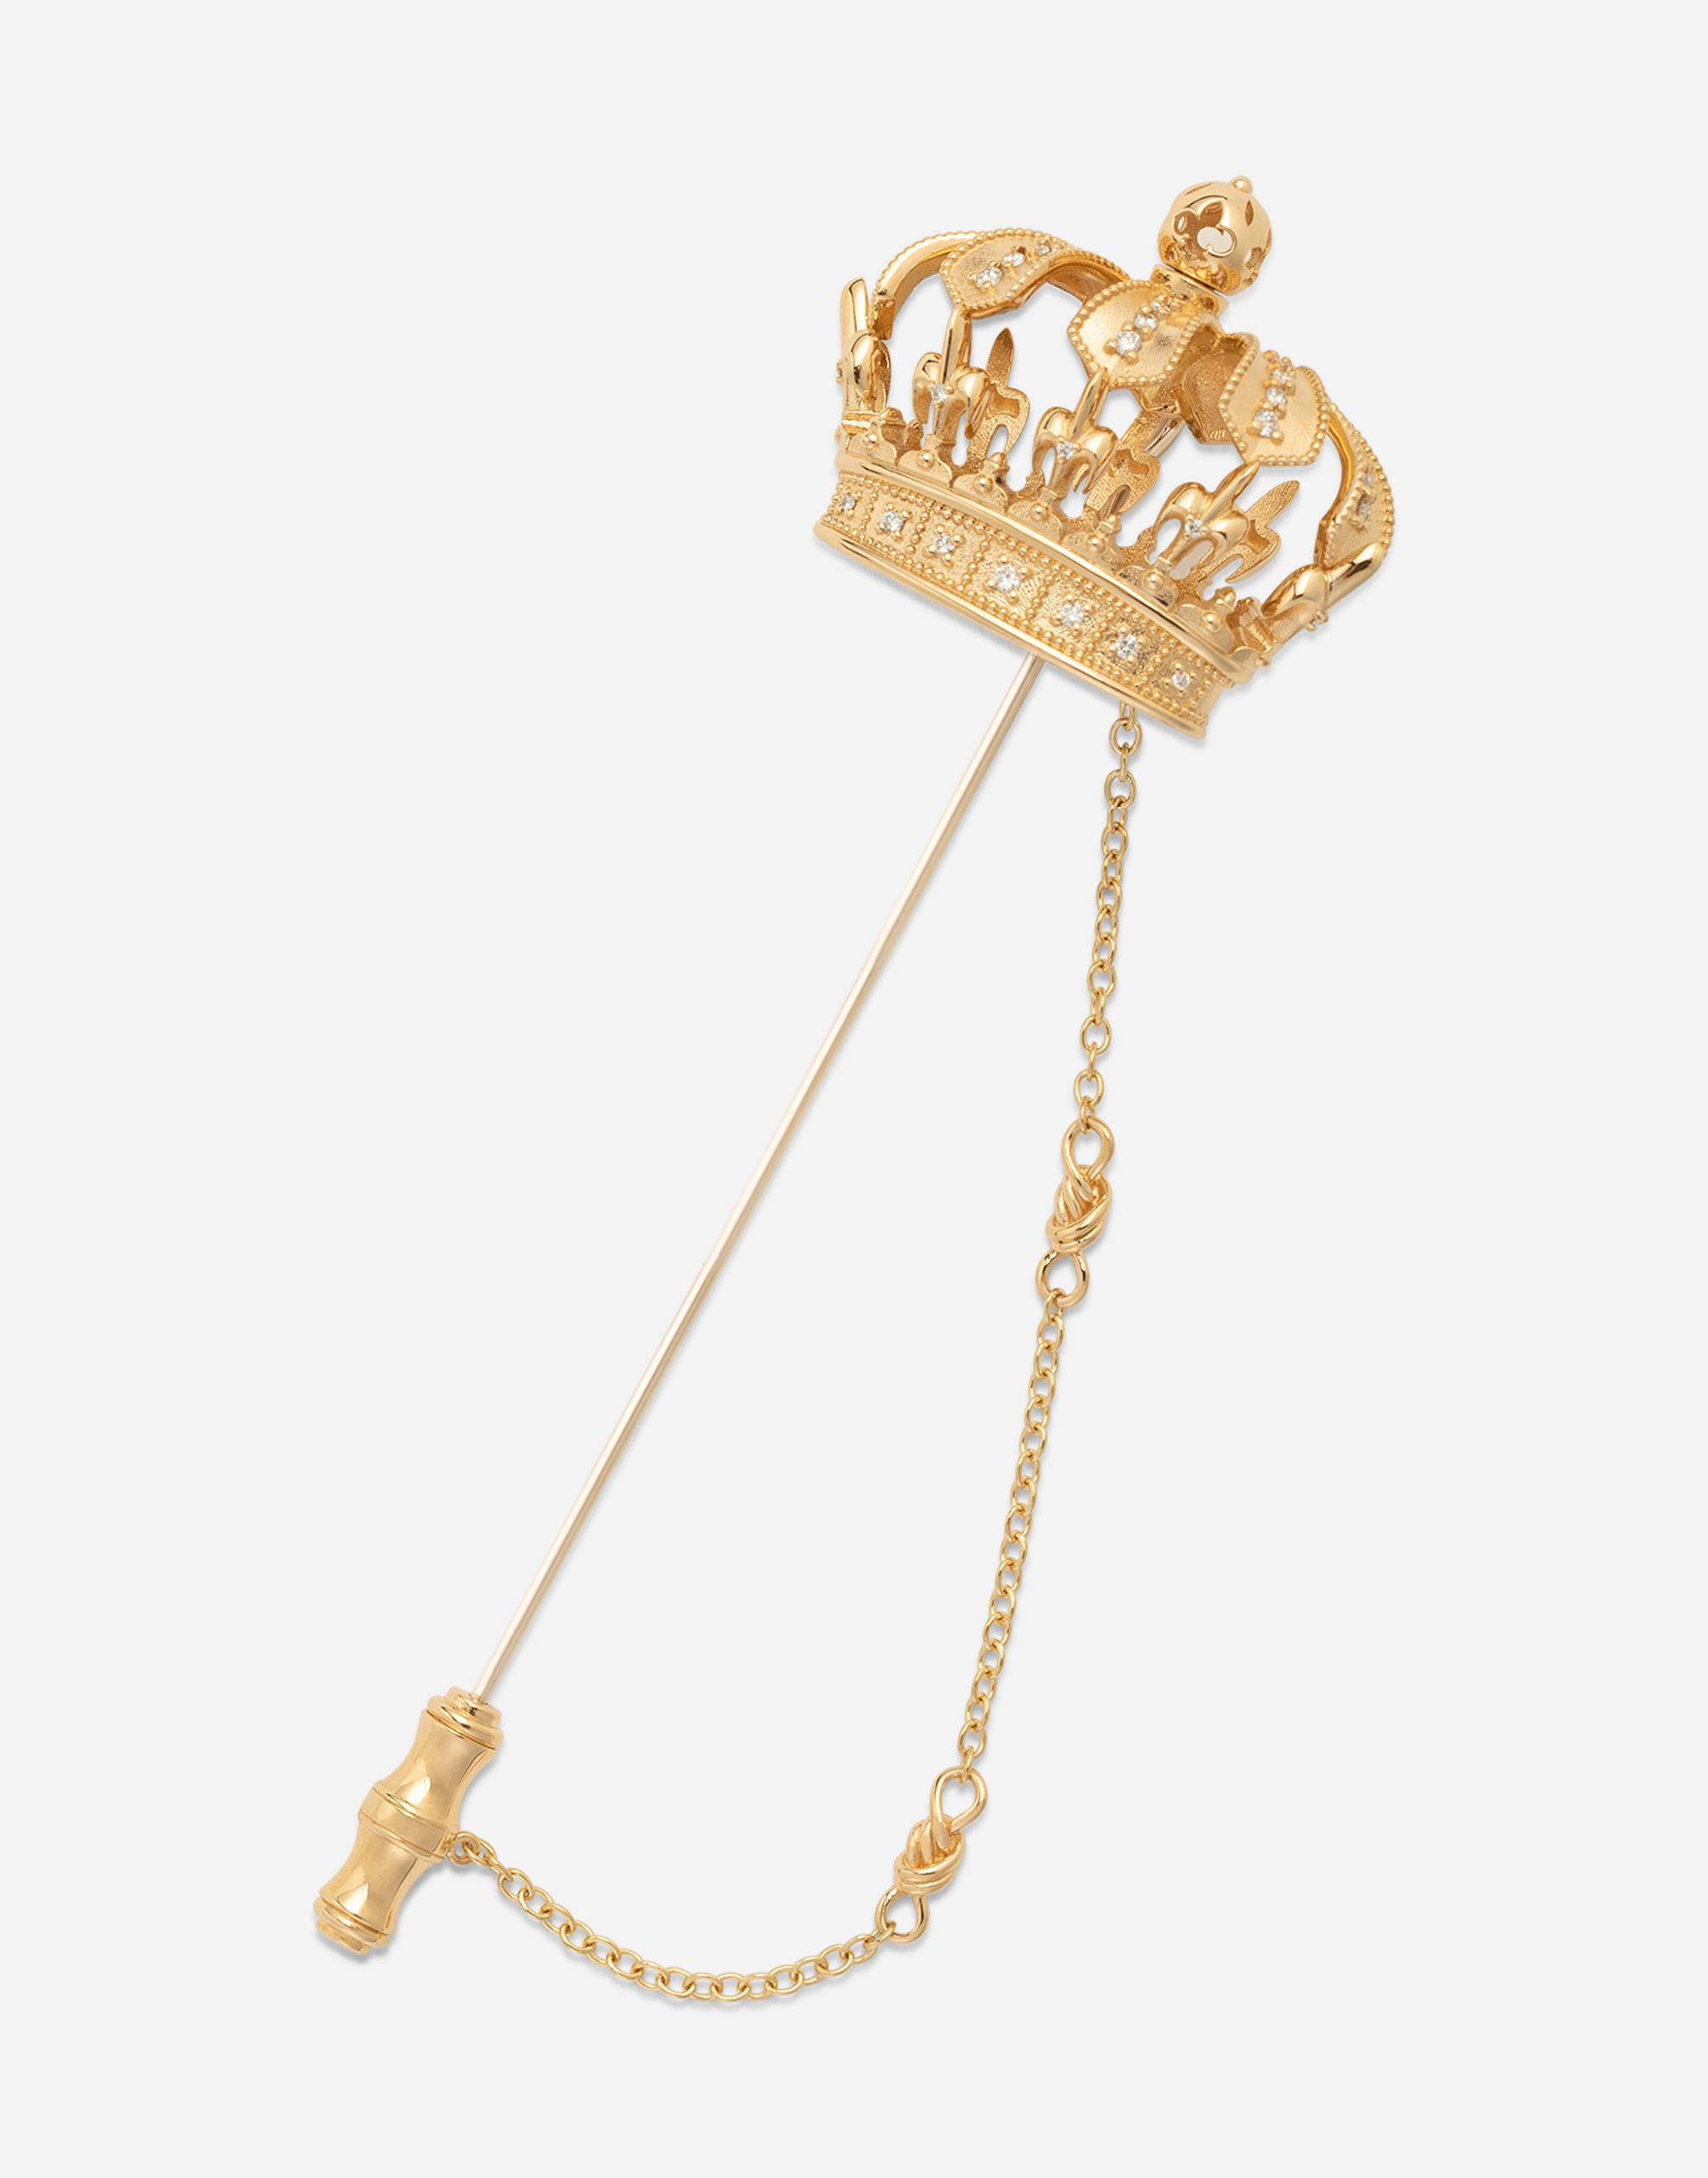 CROWN STICK PIN BROOCH IN YELLOW AND WHITE GOLD WITH CURLY GOLD THREAD EMBELLISHMENTS AND SPHERE